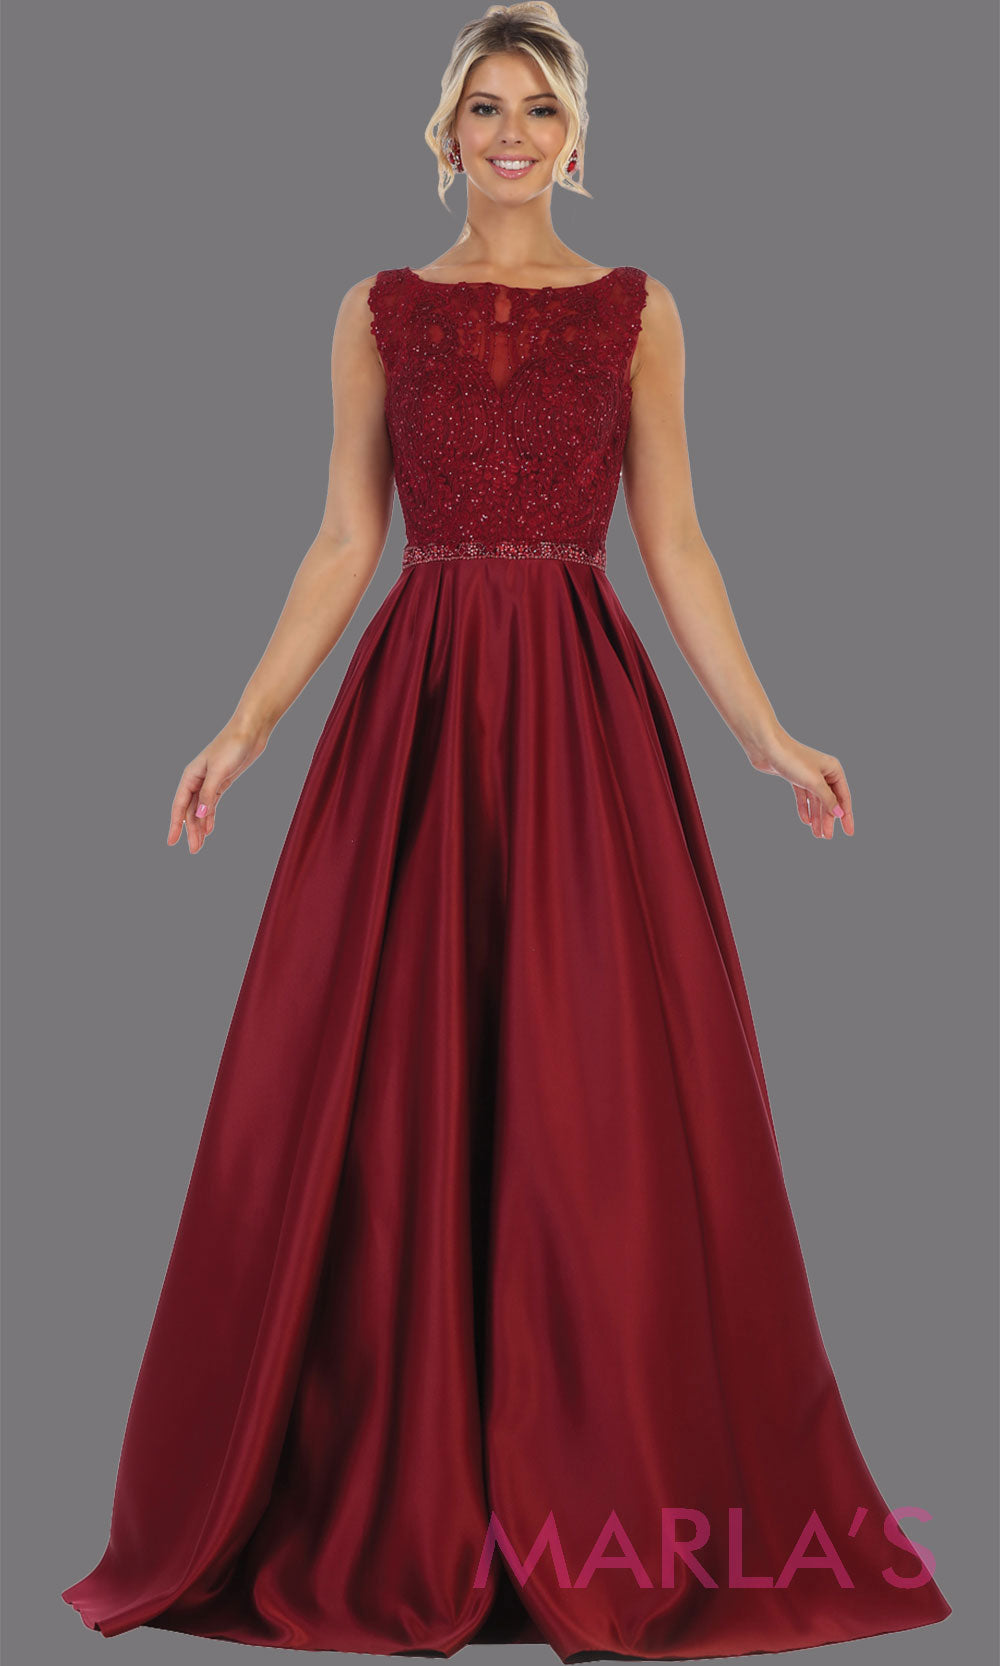 Long burgundy high neck taffeta satin gown with lace top from MayQueen RQ7744. This long dark red gown is perfect for wedding engagement dress, reception dress, modest prom dress, modest formal plus size evening gown, mother of the bride